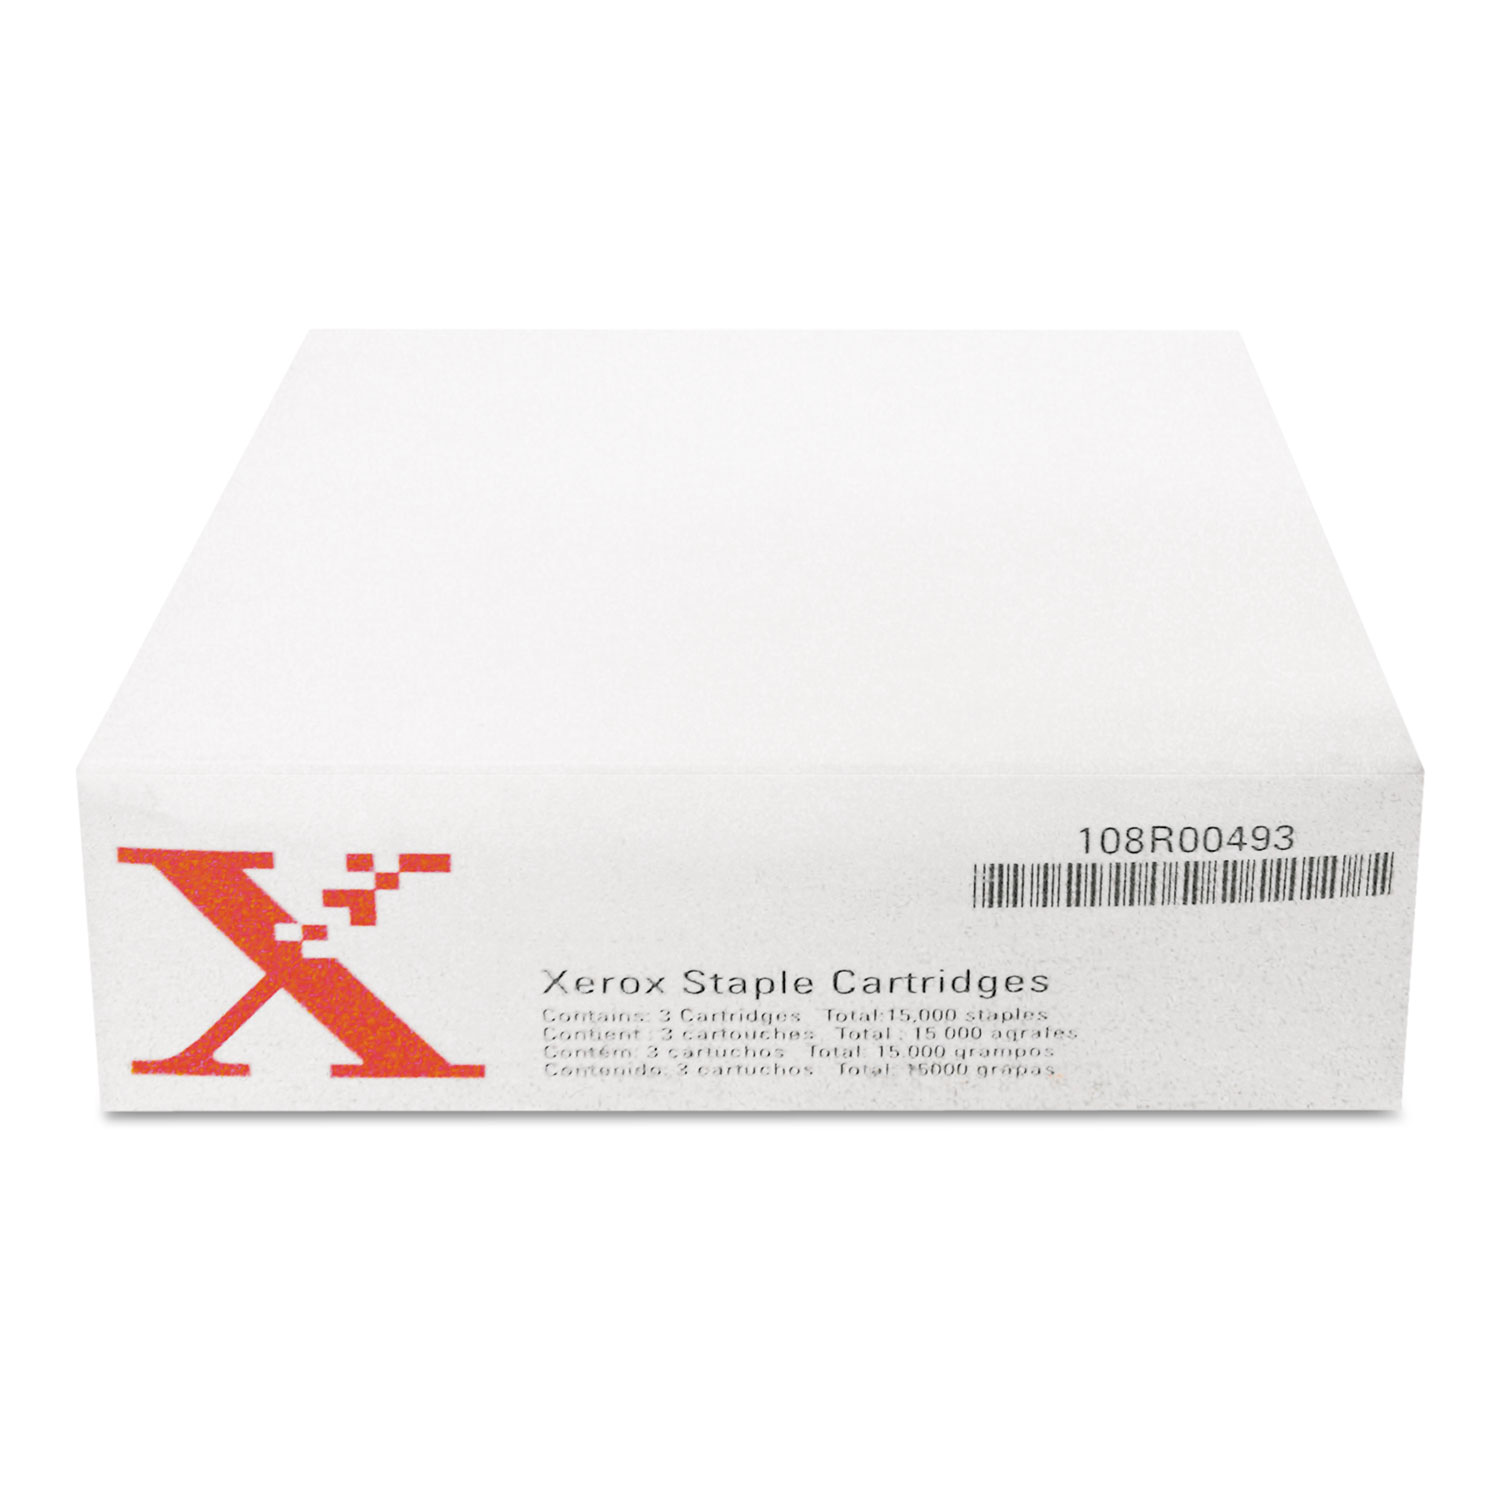  Xerox 108R00493 Staples for Xerox WORKCENTRE PRO245/M45/232/Others, 3 Cartridges, 15,000 Staples (XER108R00493) 